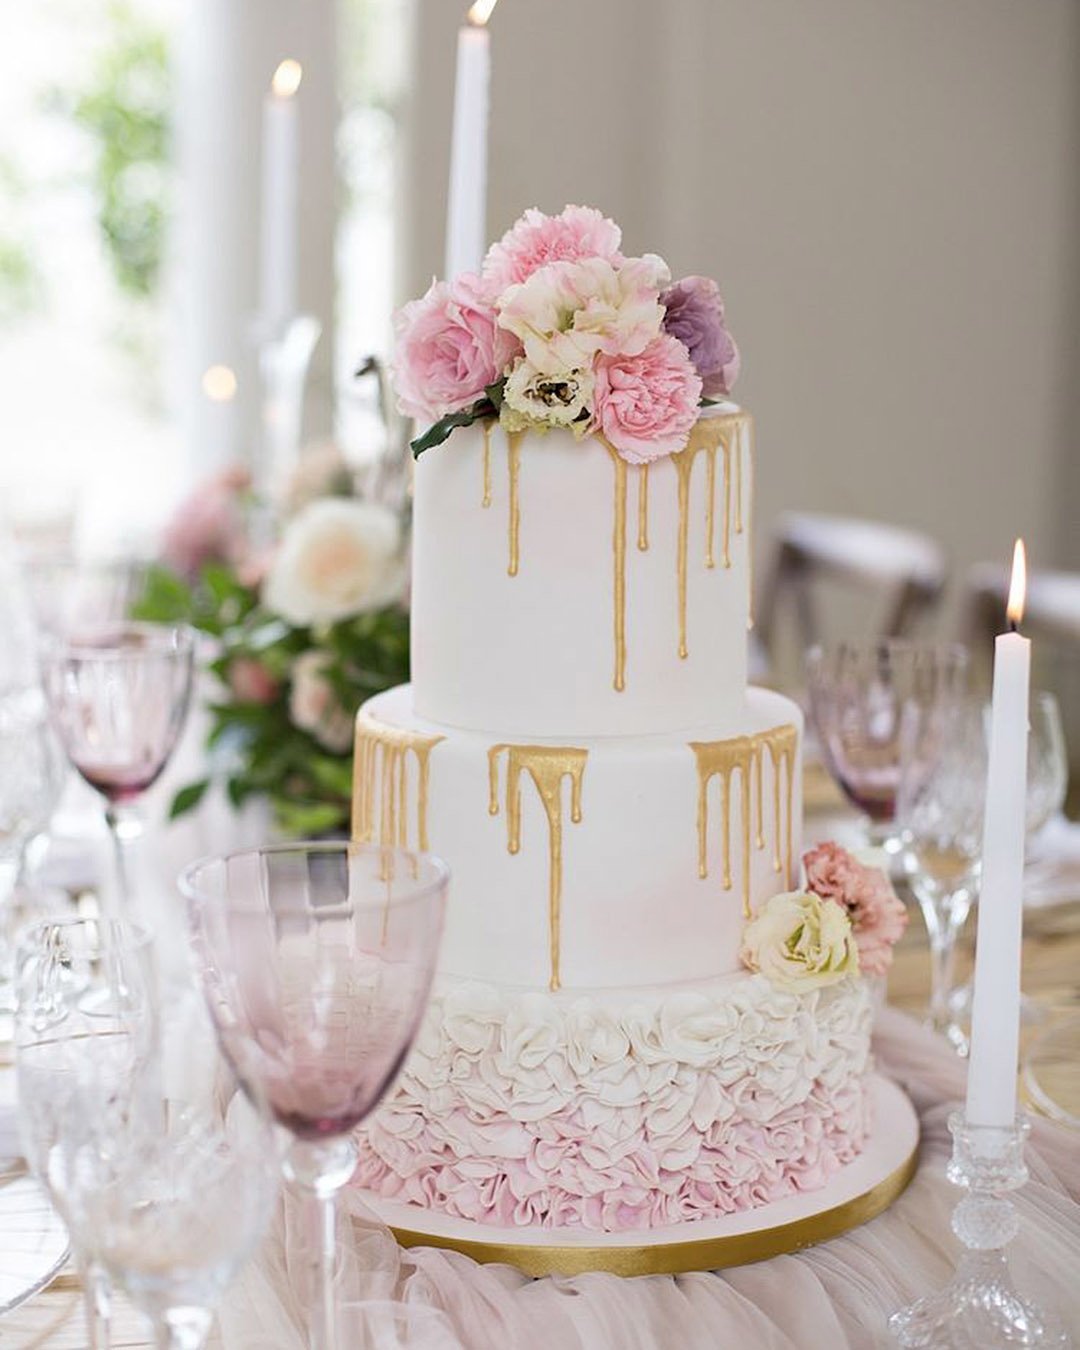 drip wedding cakes white lilac pink with flowers and candles gold